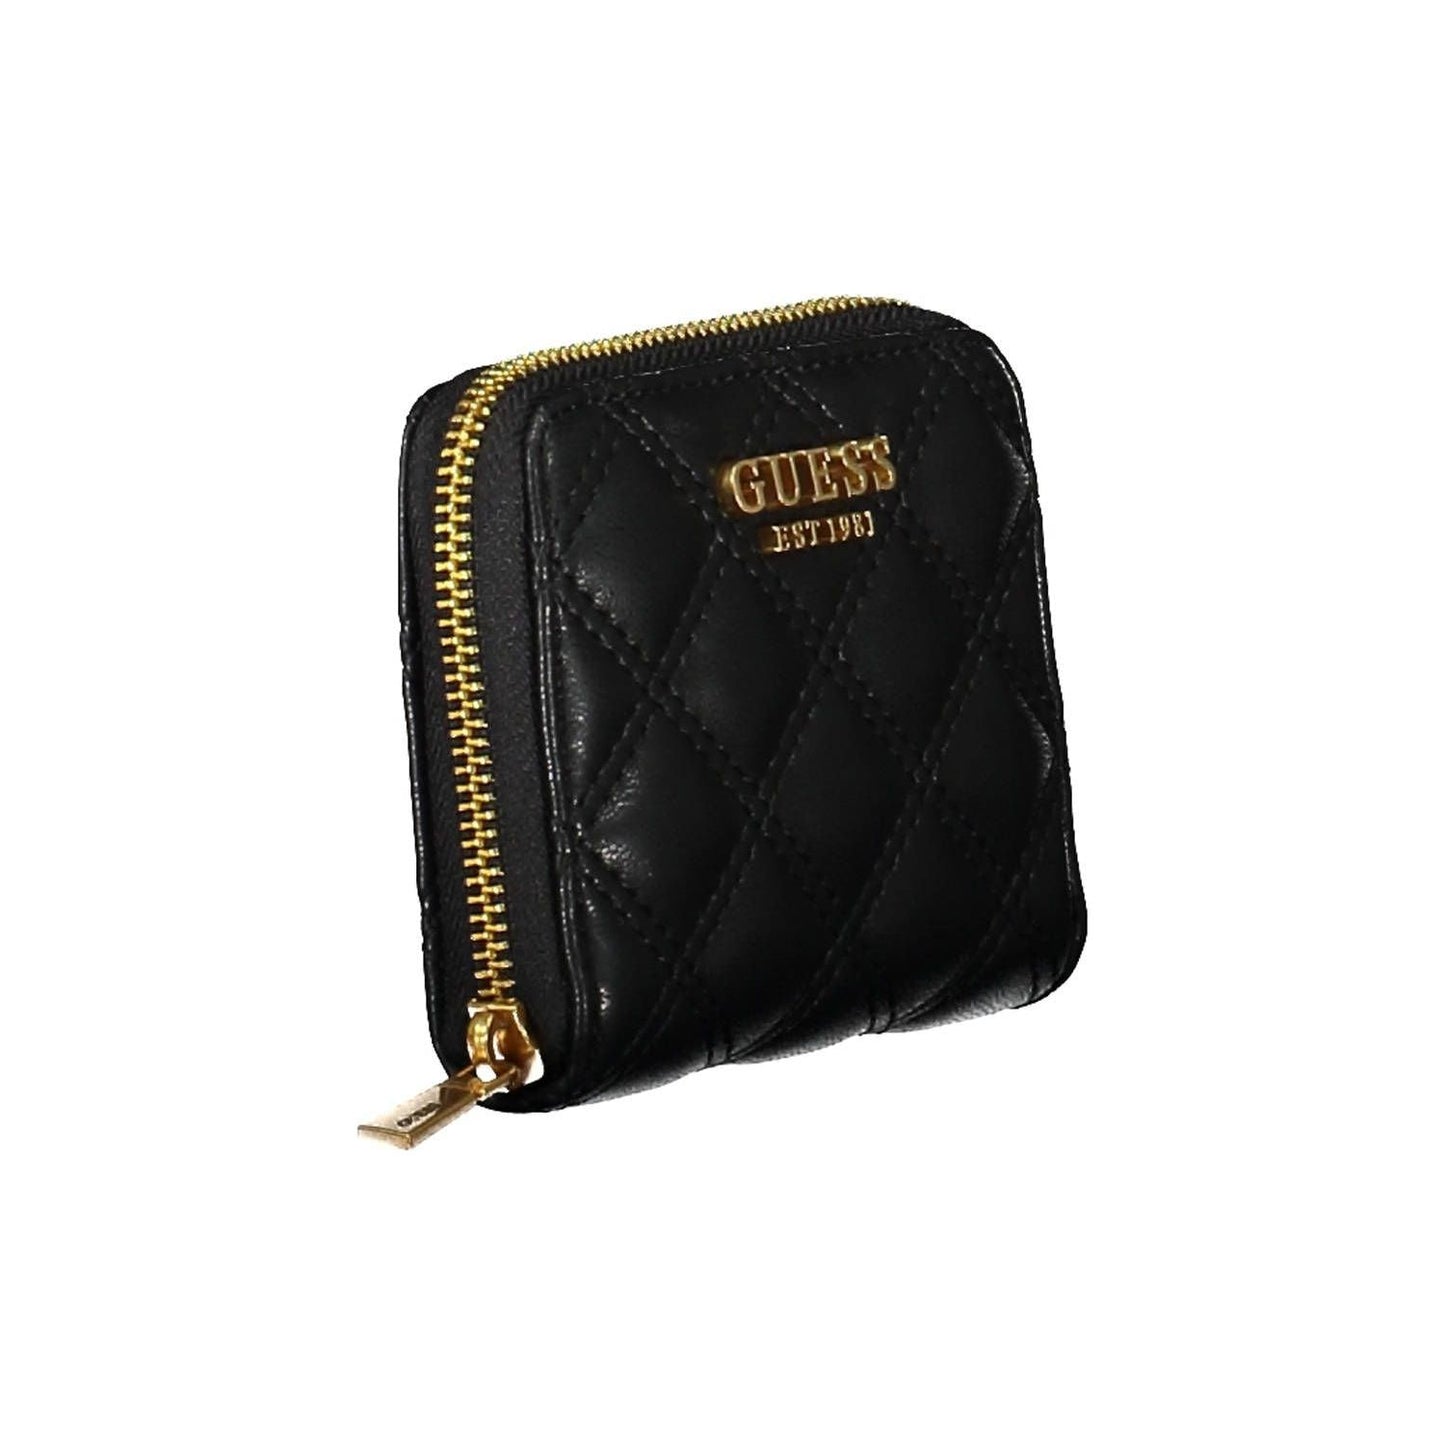 Guess Jeans Chic Black Wallet with Contrasting Details chic-black-wallet-with-contrasting-details